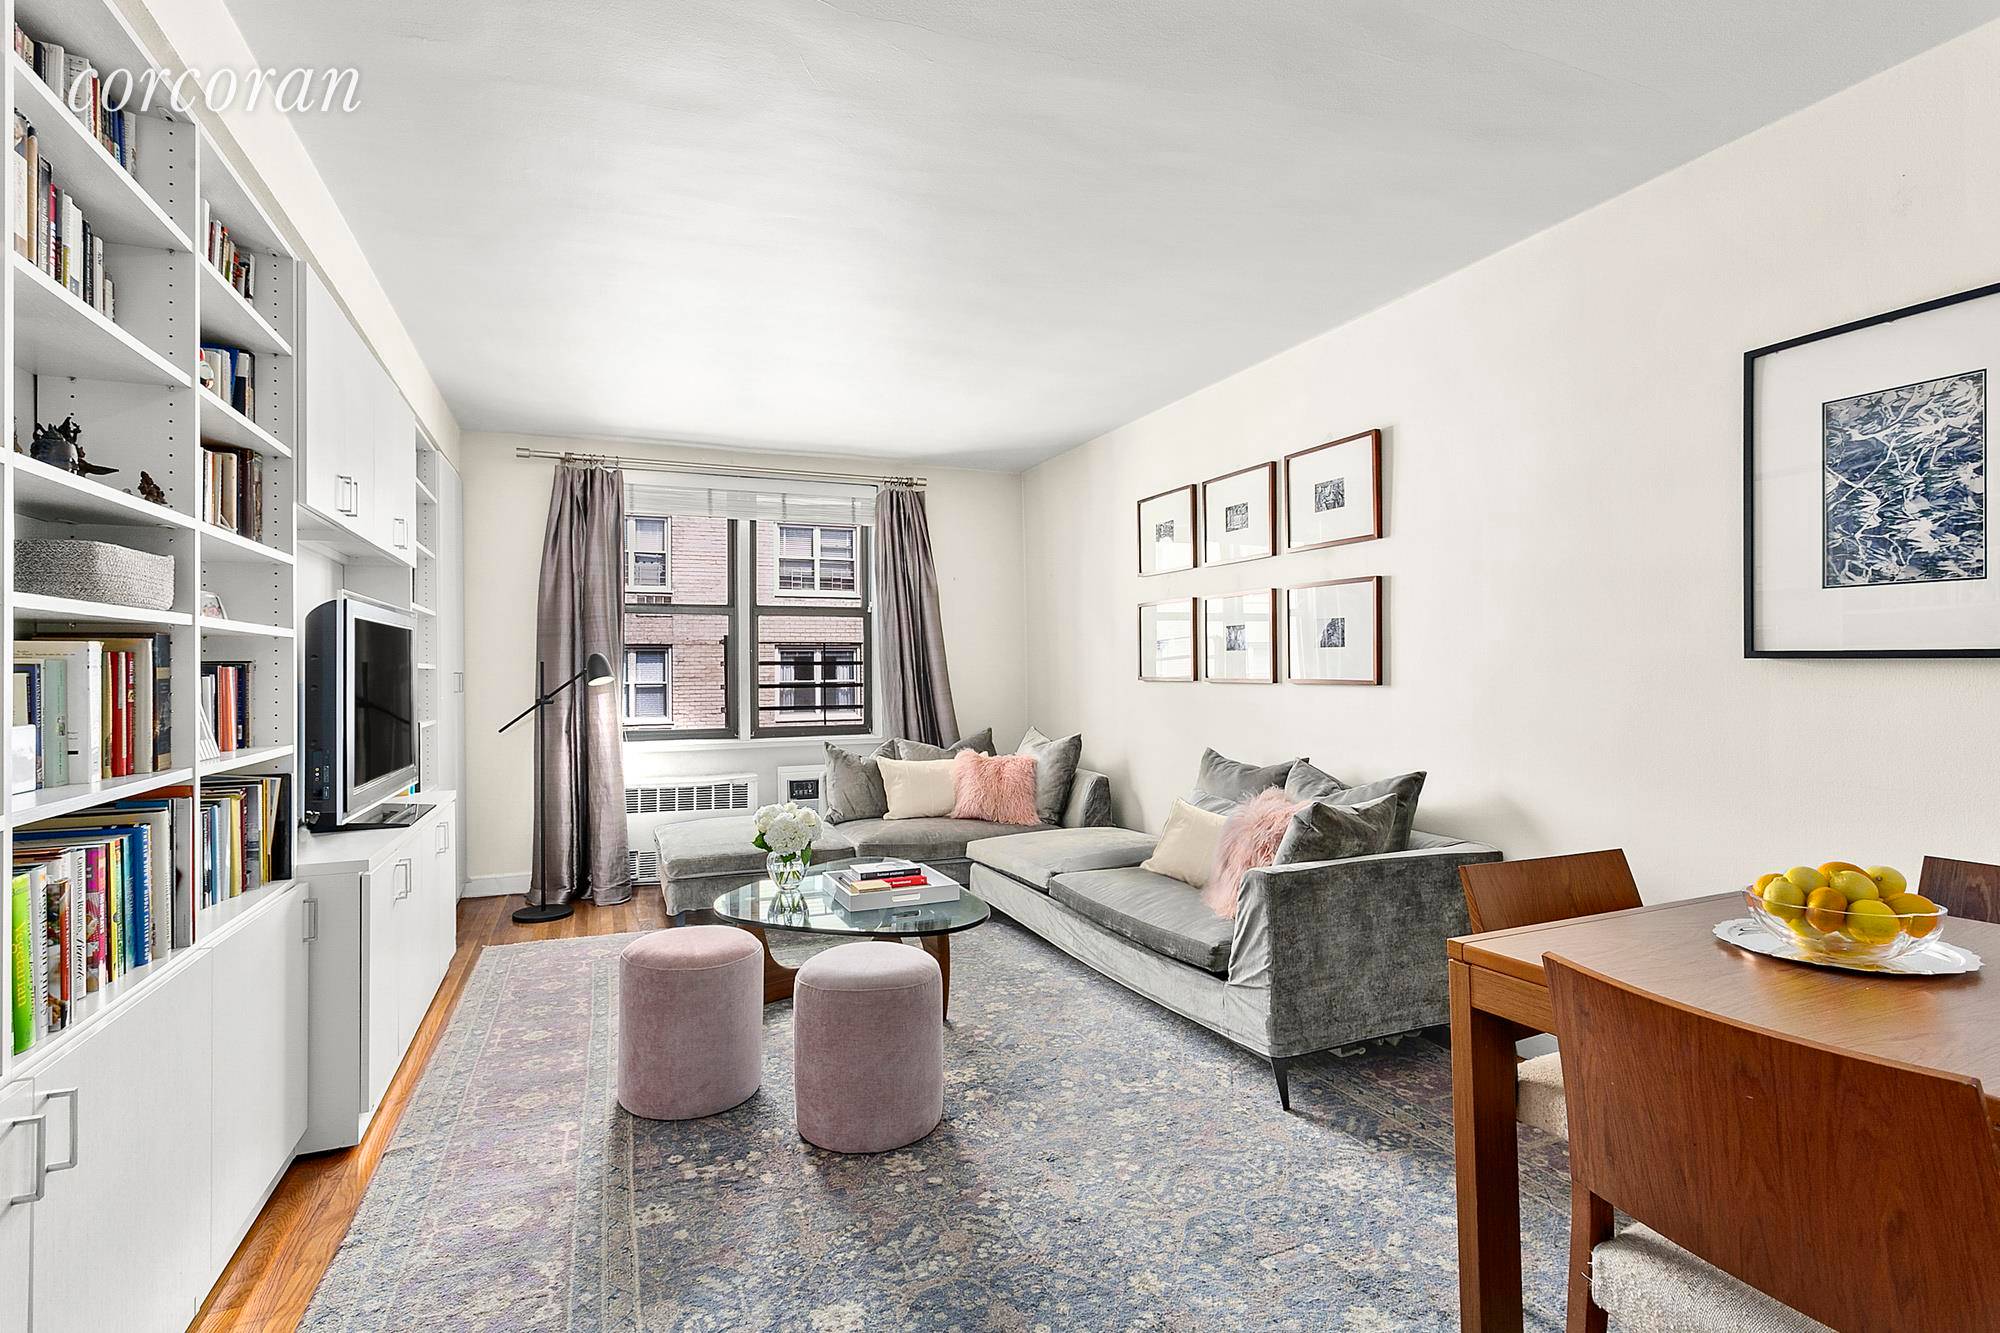 Move right in to this beautifully renovated and stylish one bedroom one bathroom co op located on a tree lined block in prime Gramercy !